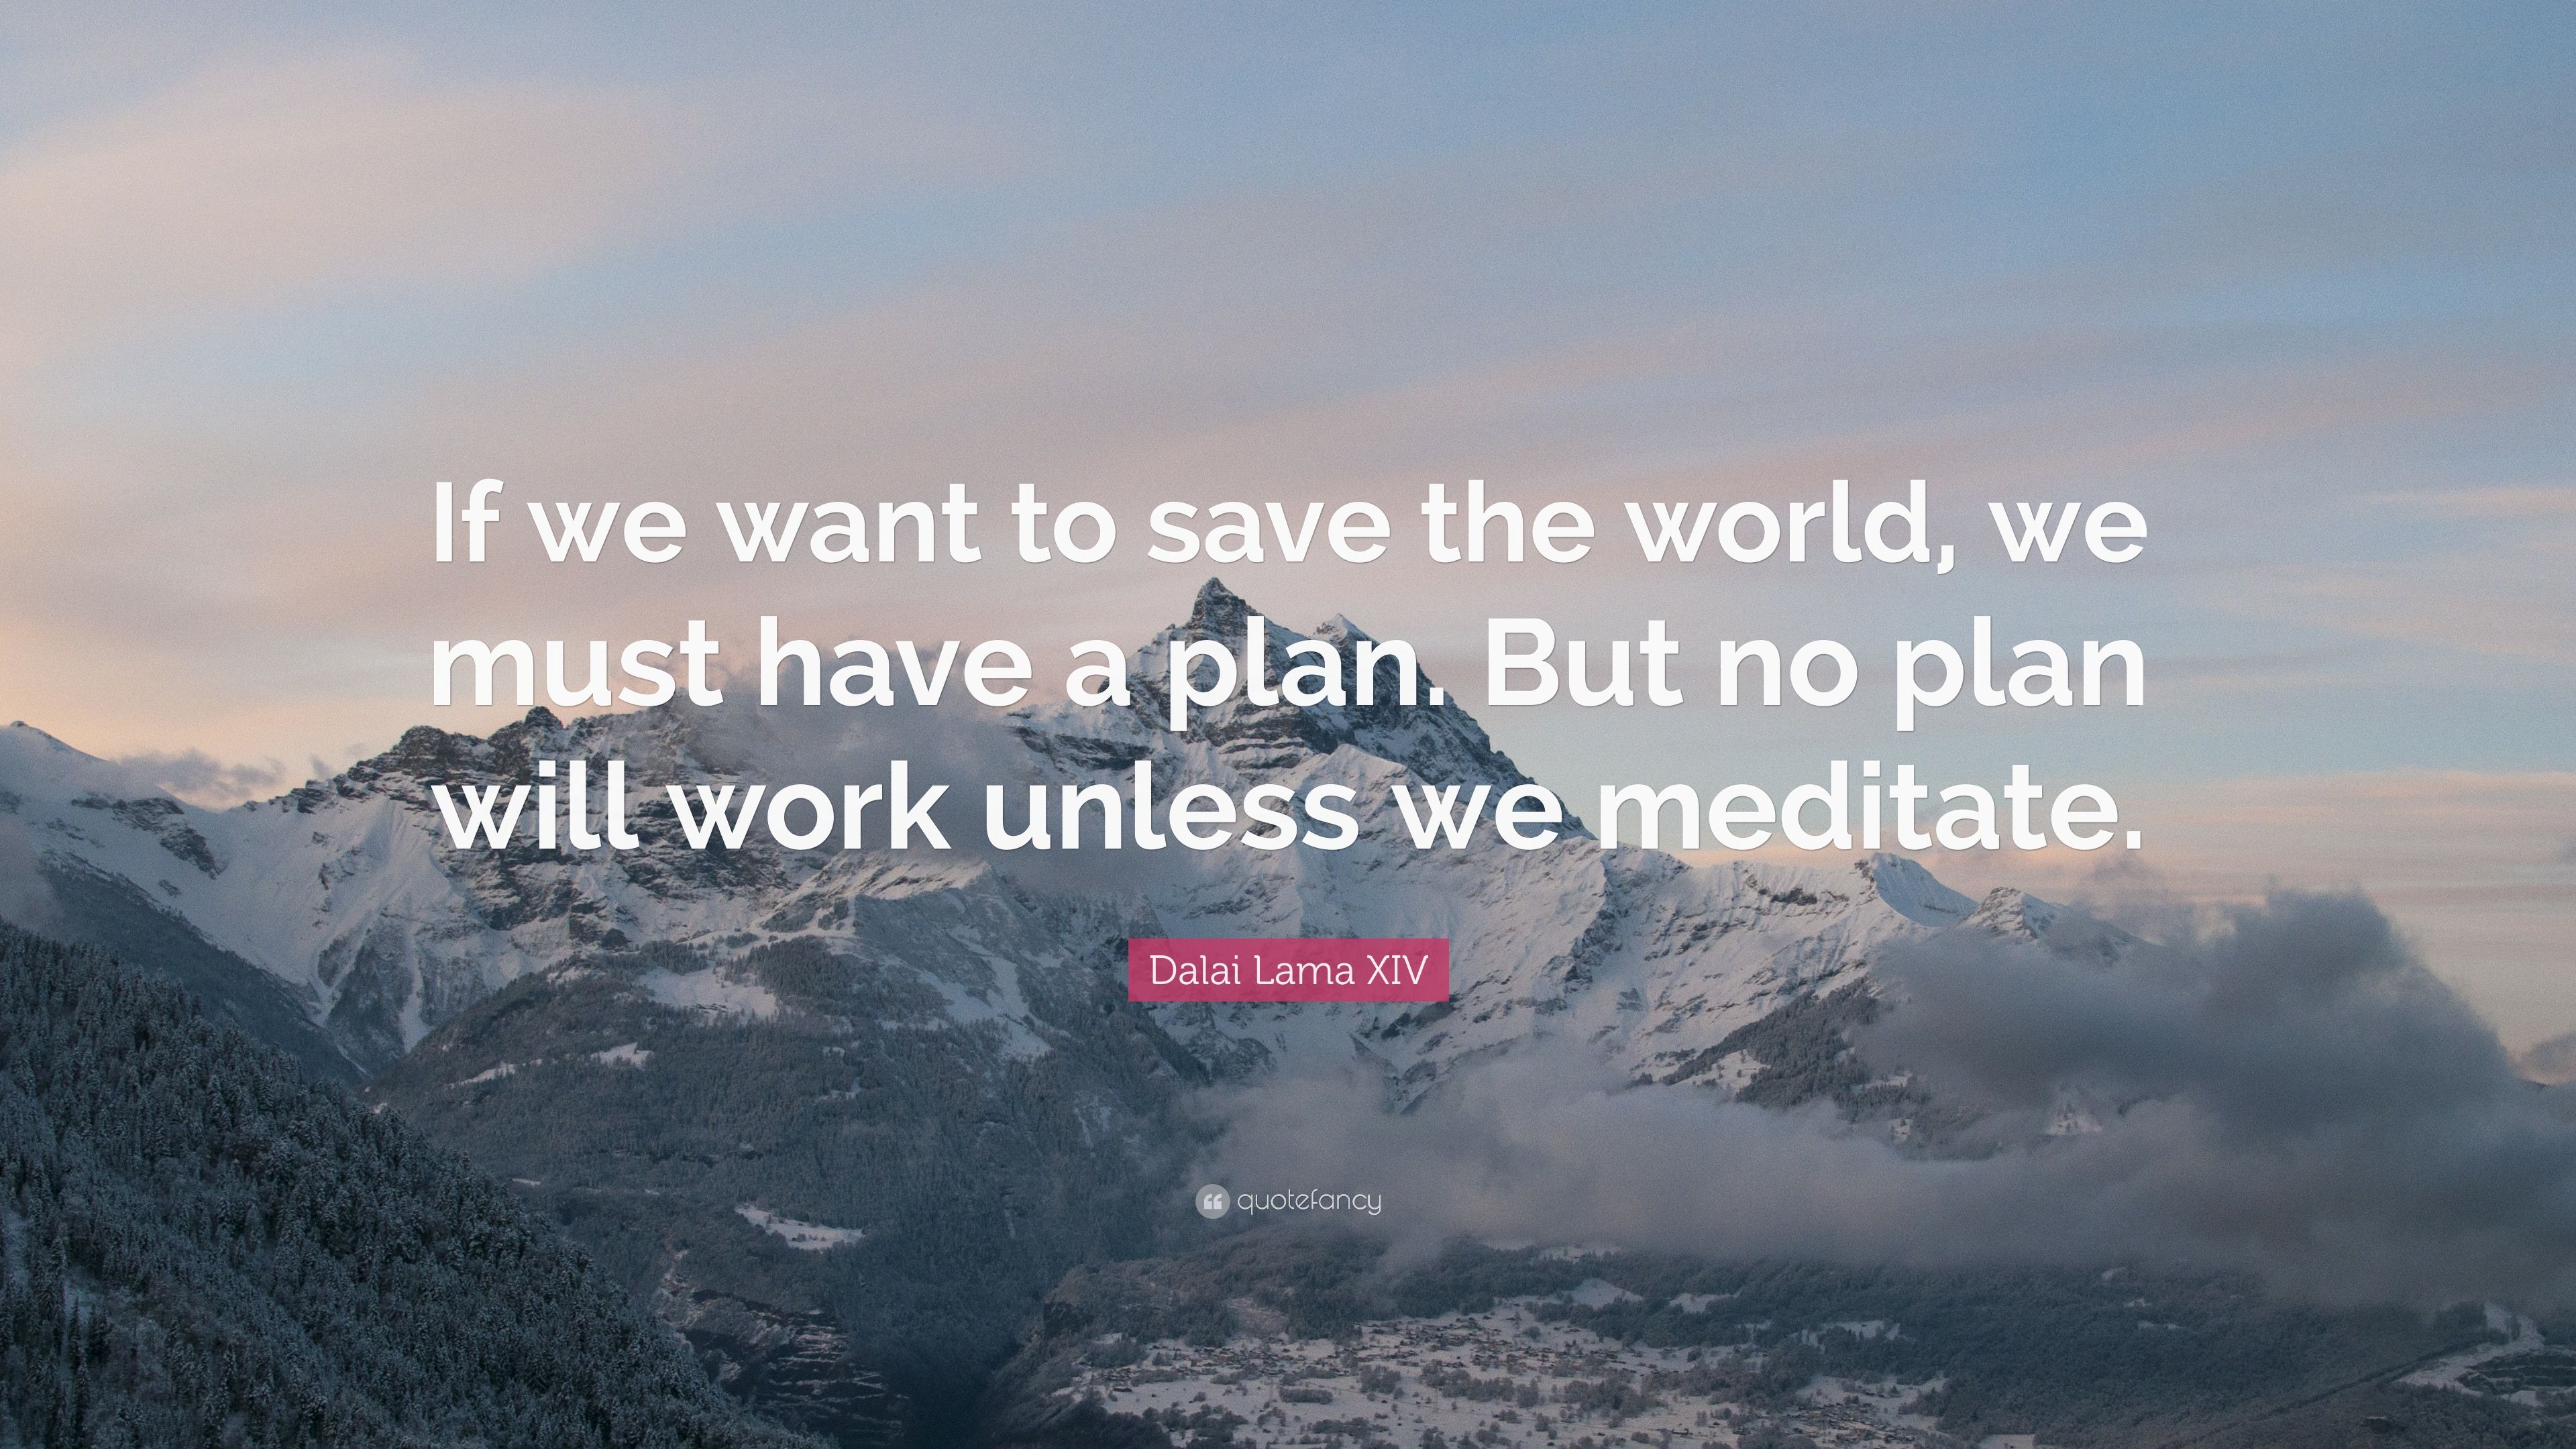 Dalai Lama XIV Quote: “If we want to save the world, we must have a